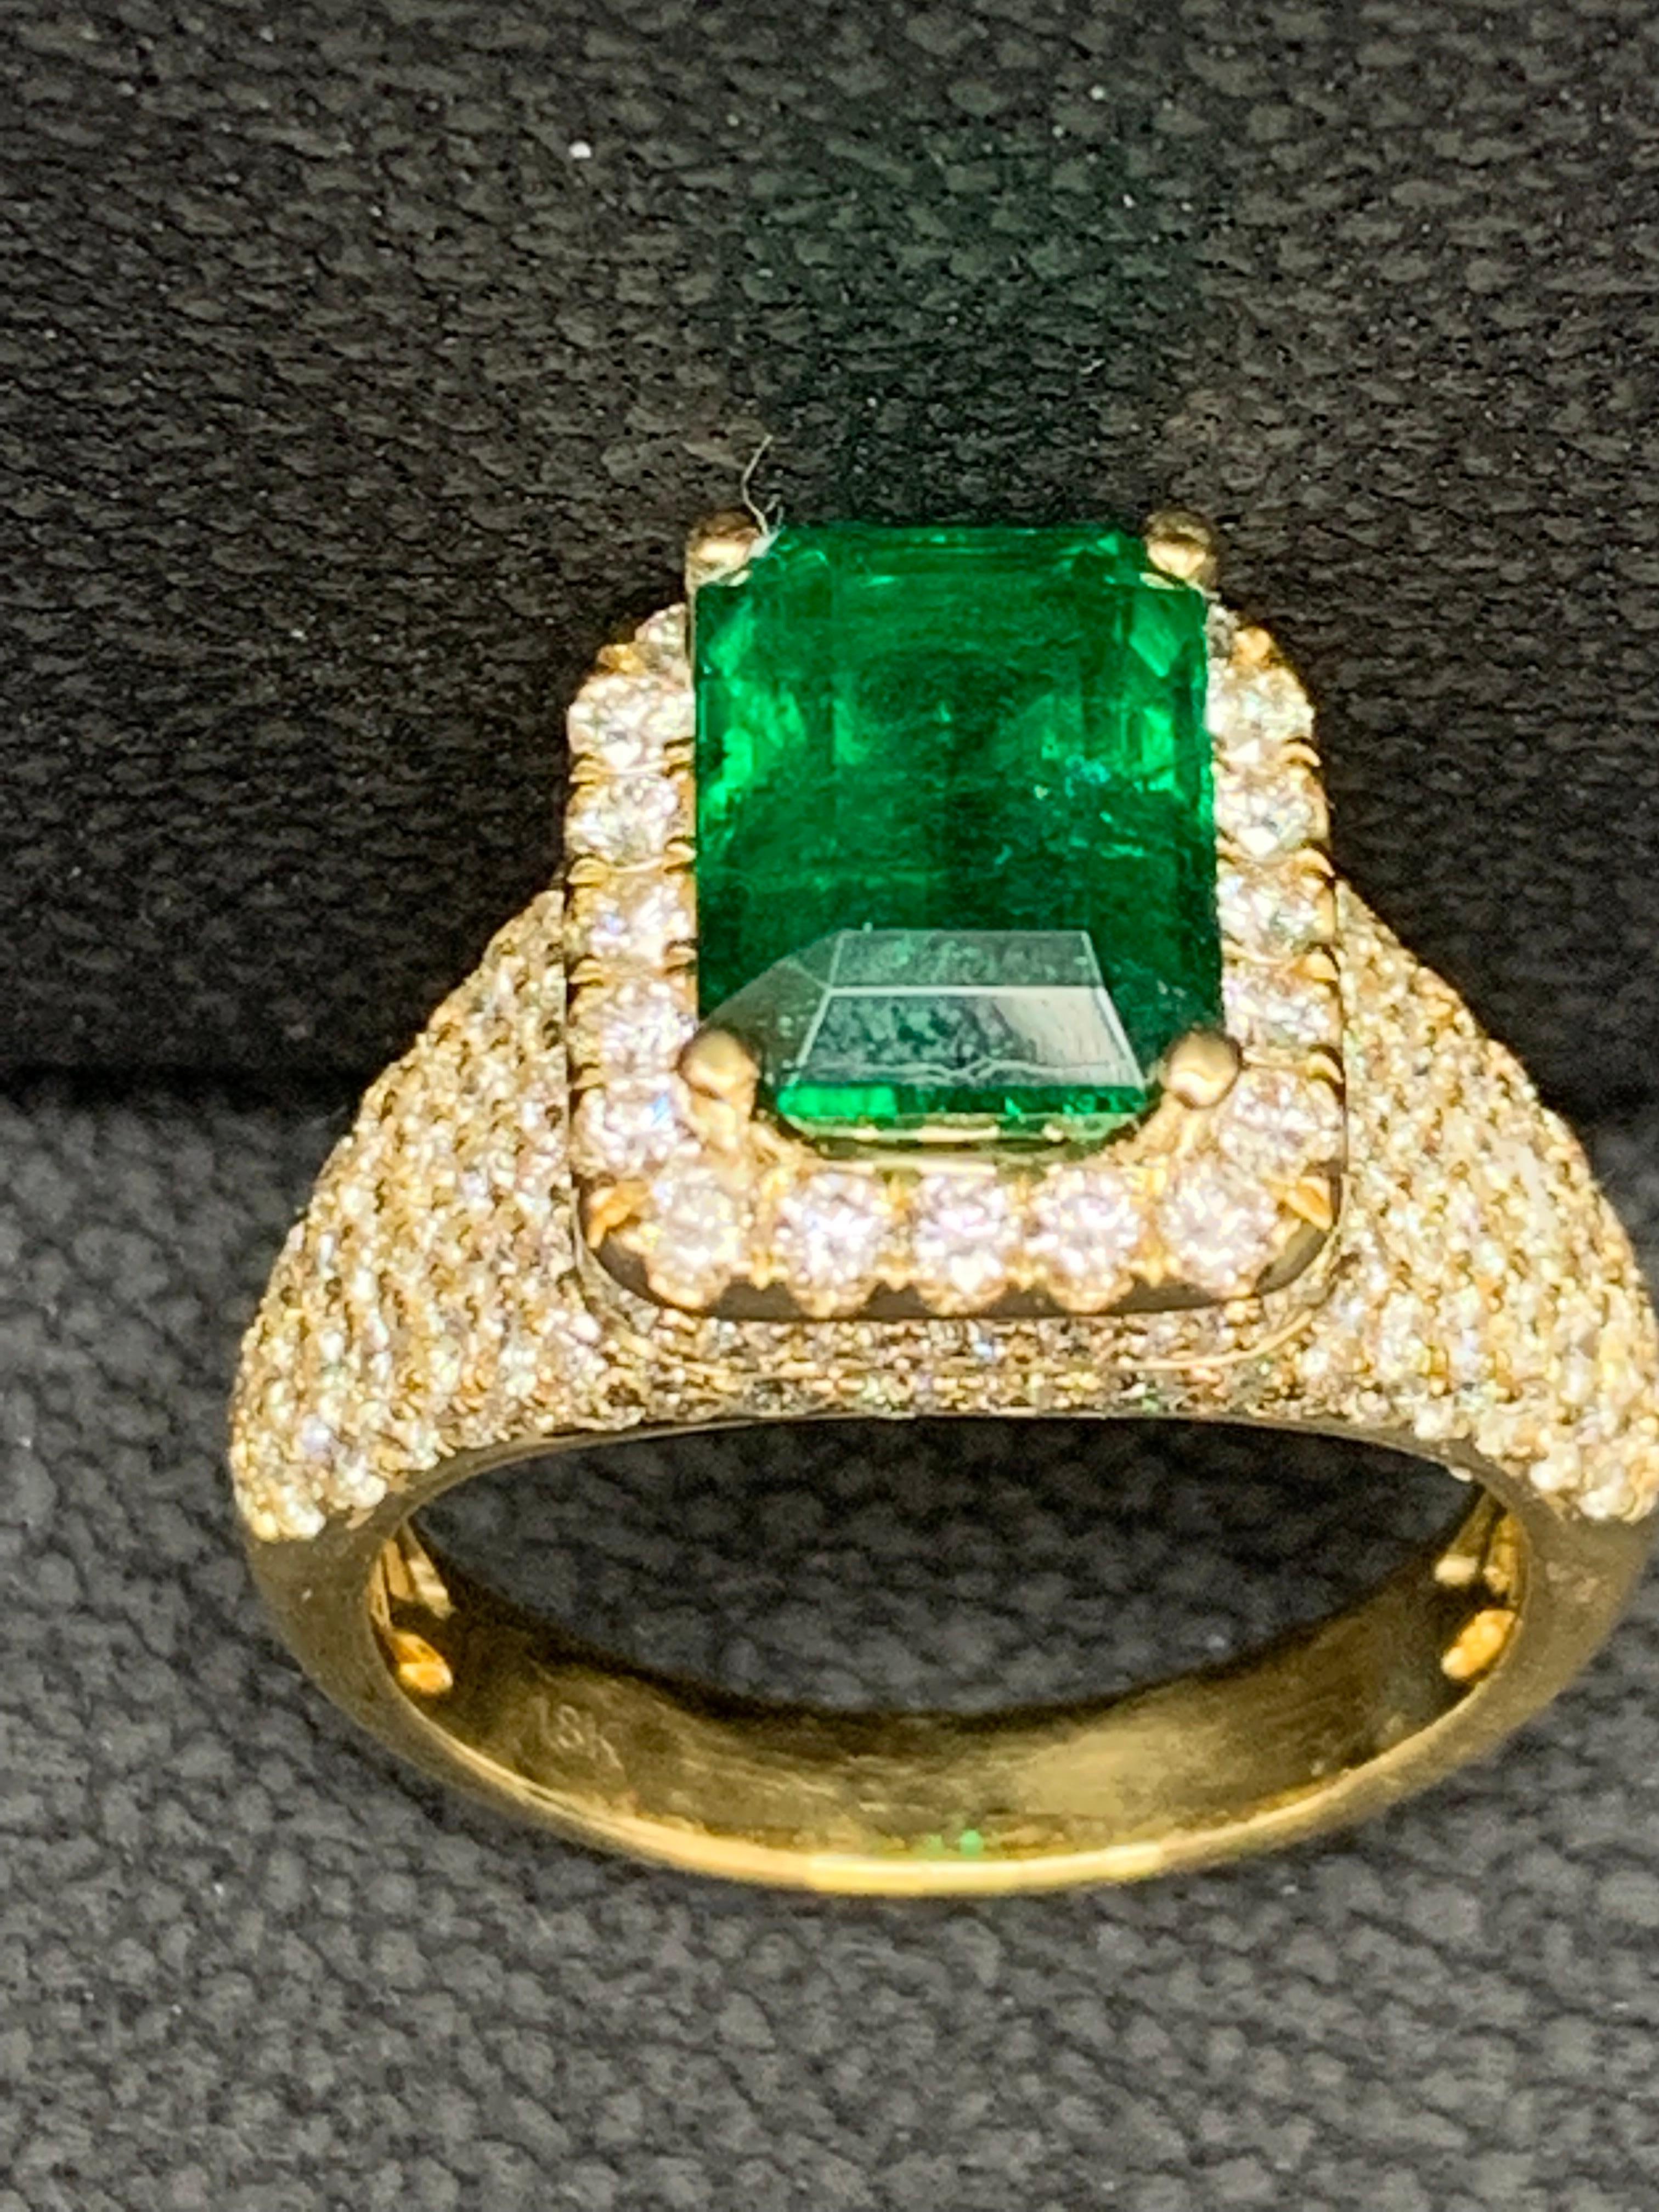 2.08 Carat Emerald Cut Emerald and Diamond Fashion Ring in 18K Yellow Gold For Sale 1